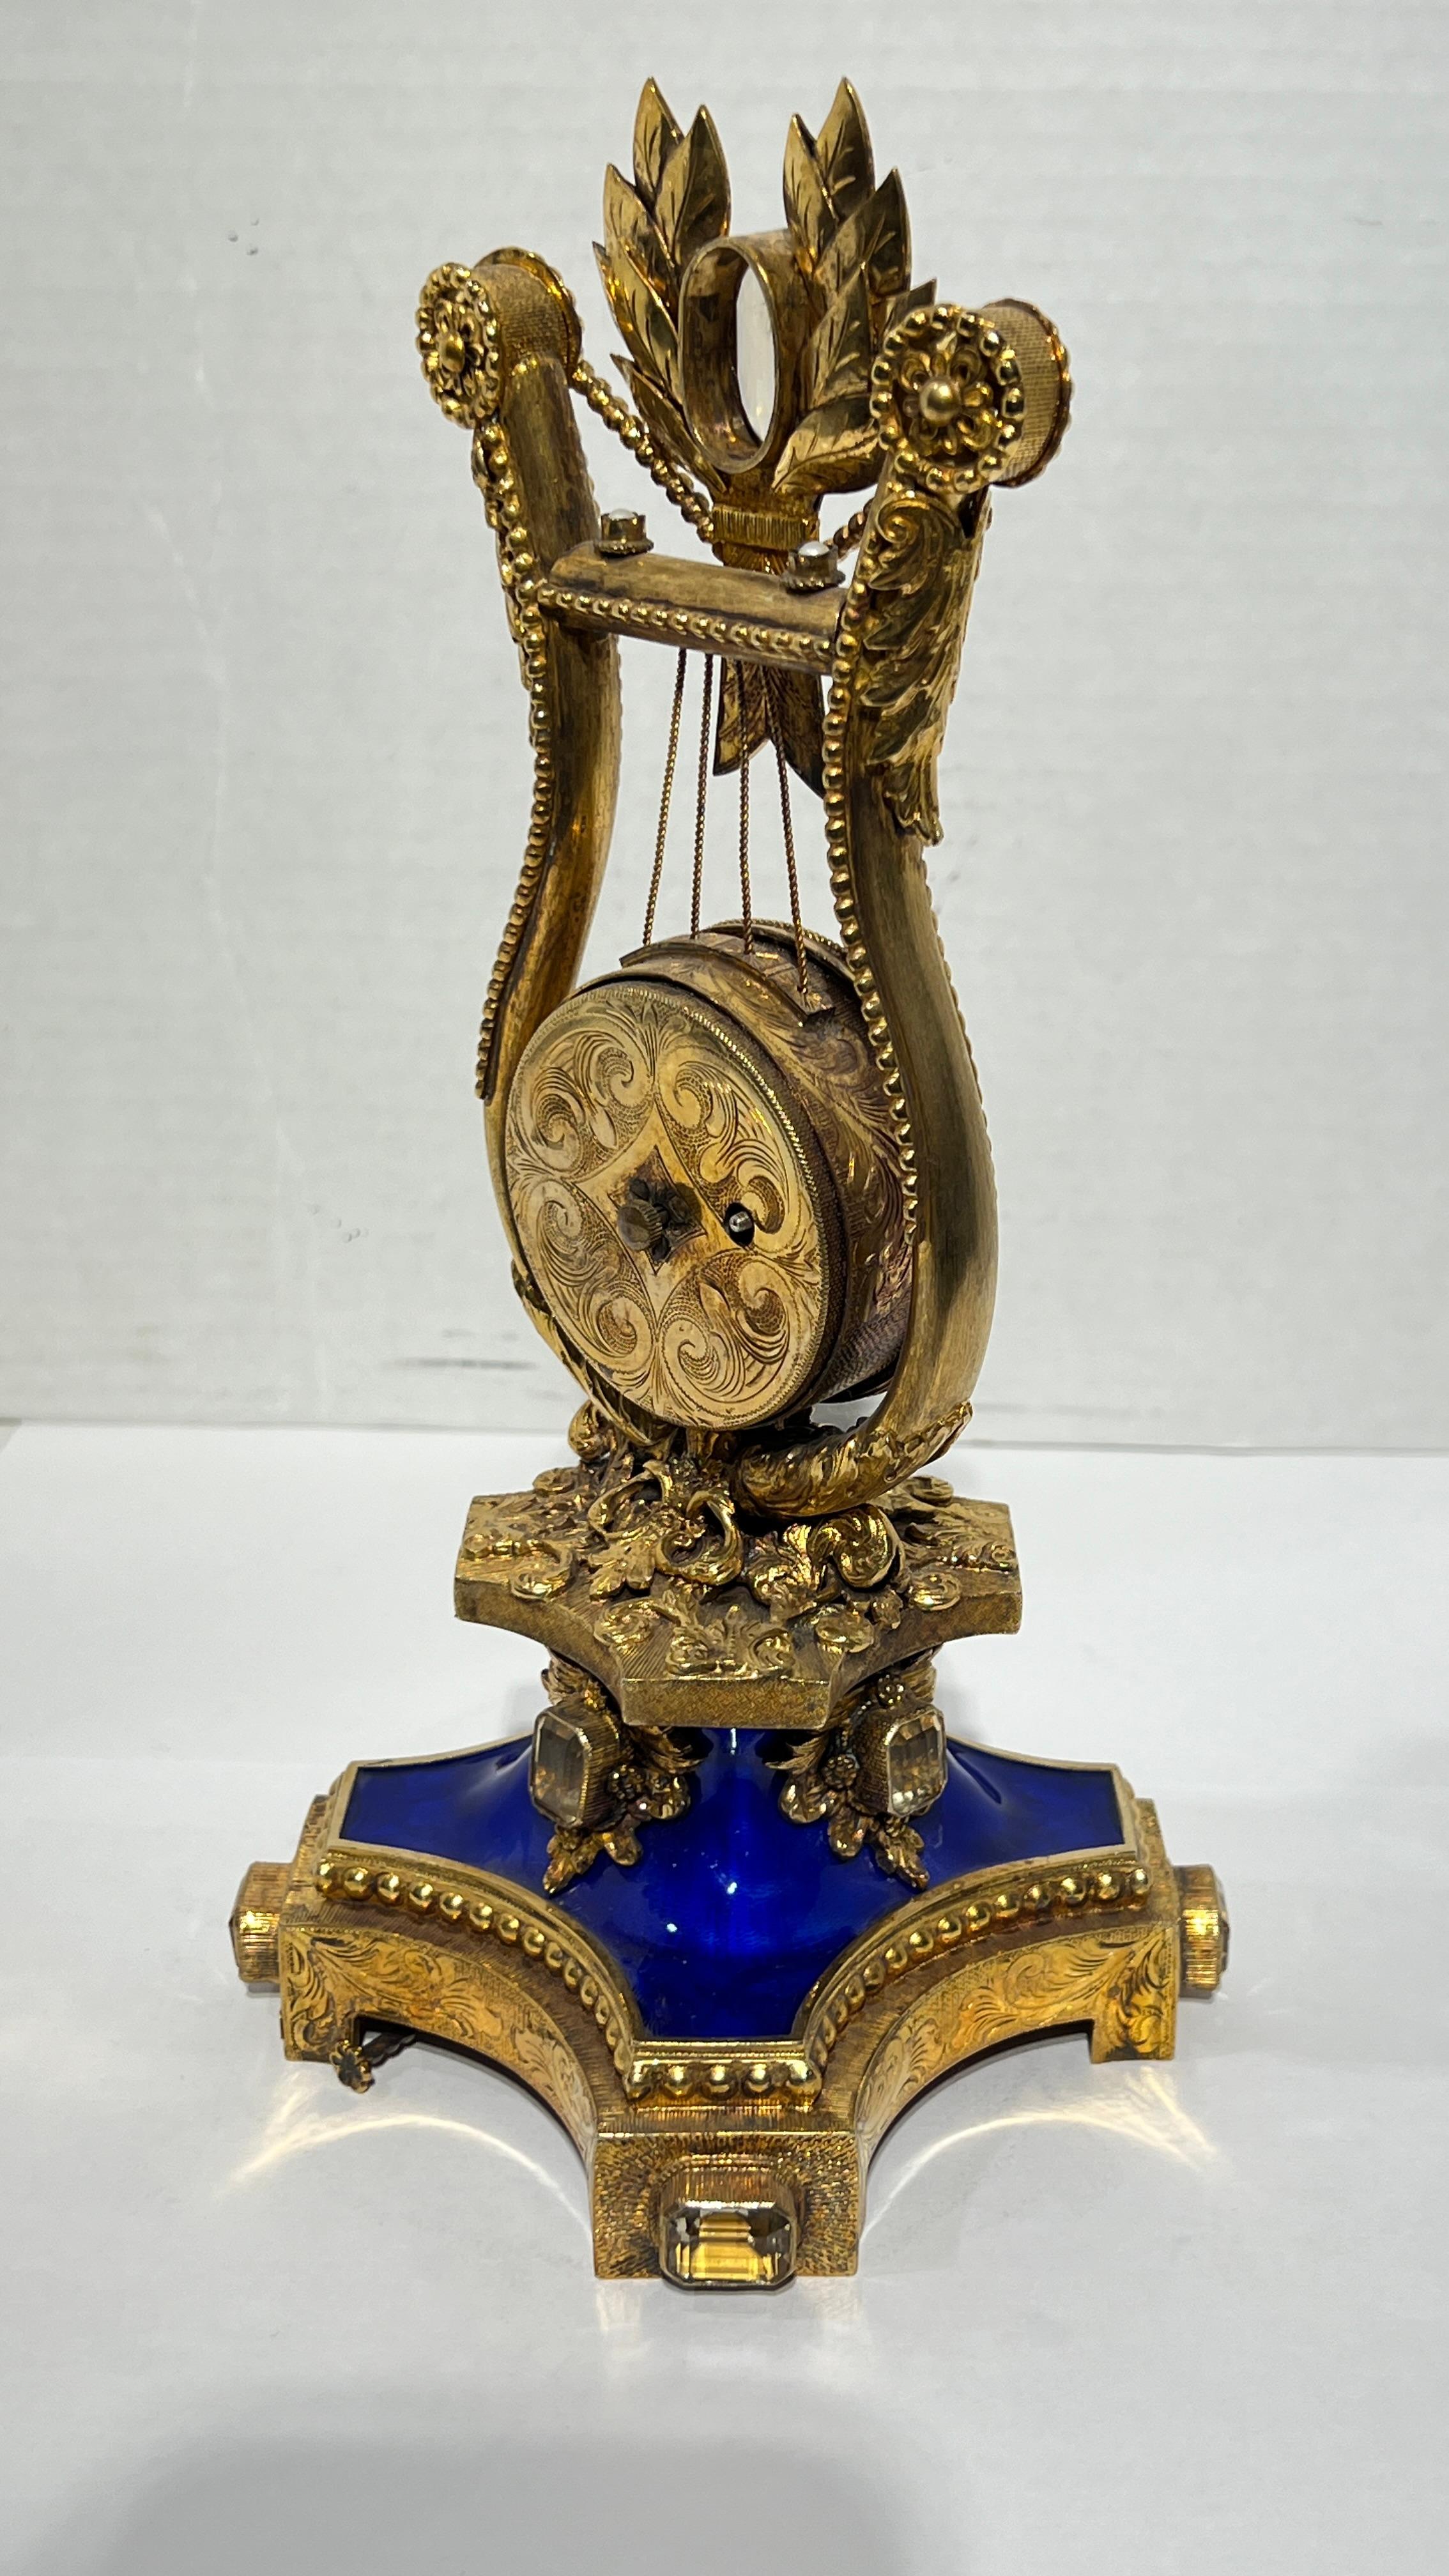 Vintage Astro Hungerian Enameled Silver Gilt Musical Clock by Reuge 2